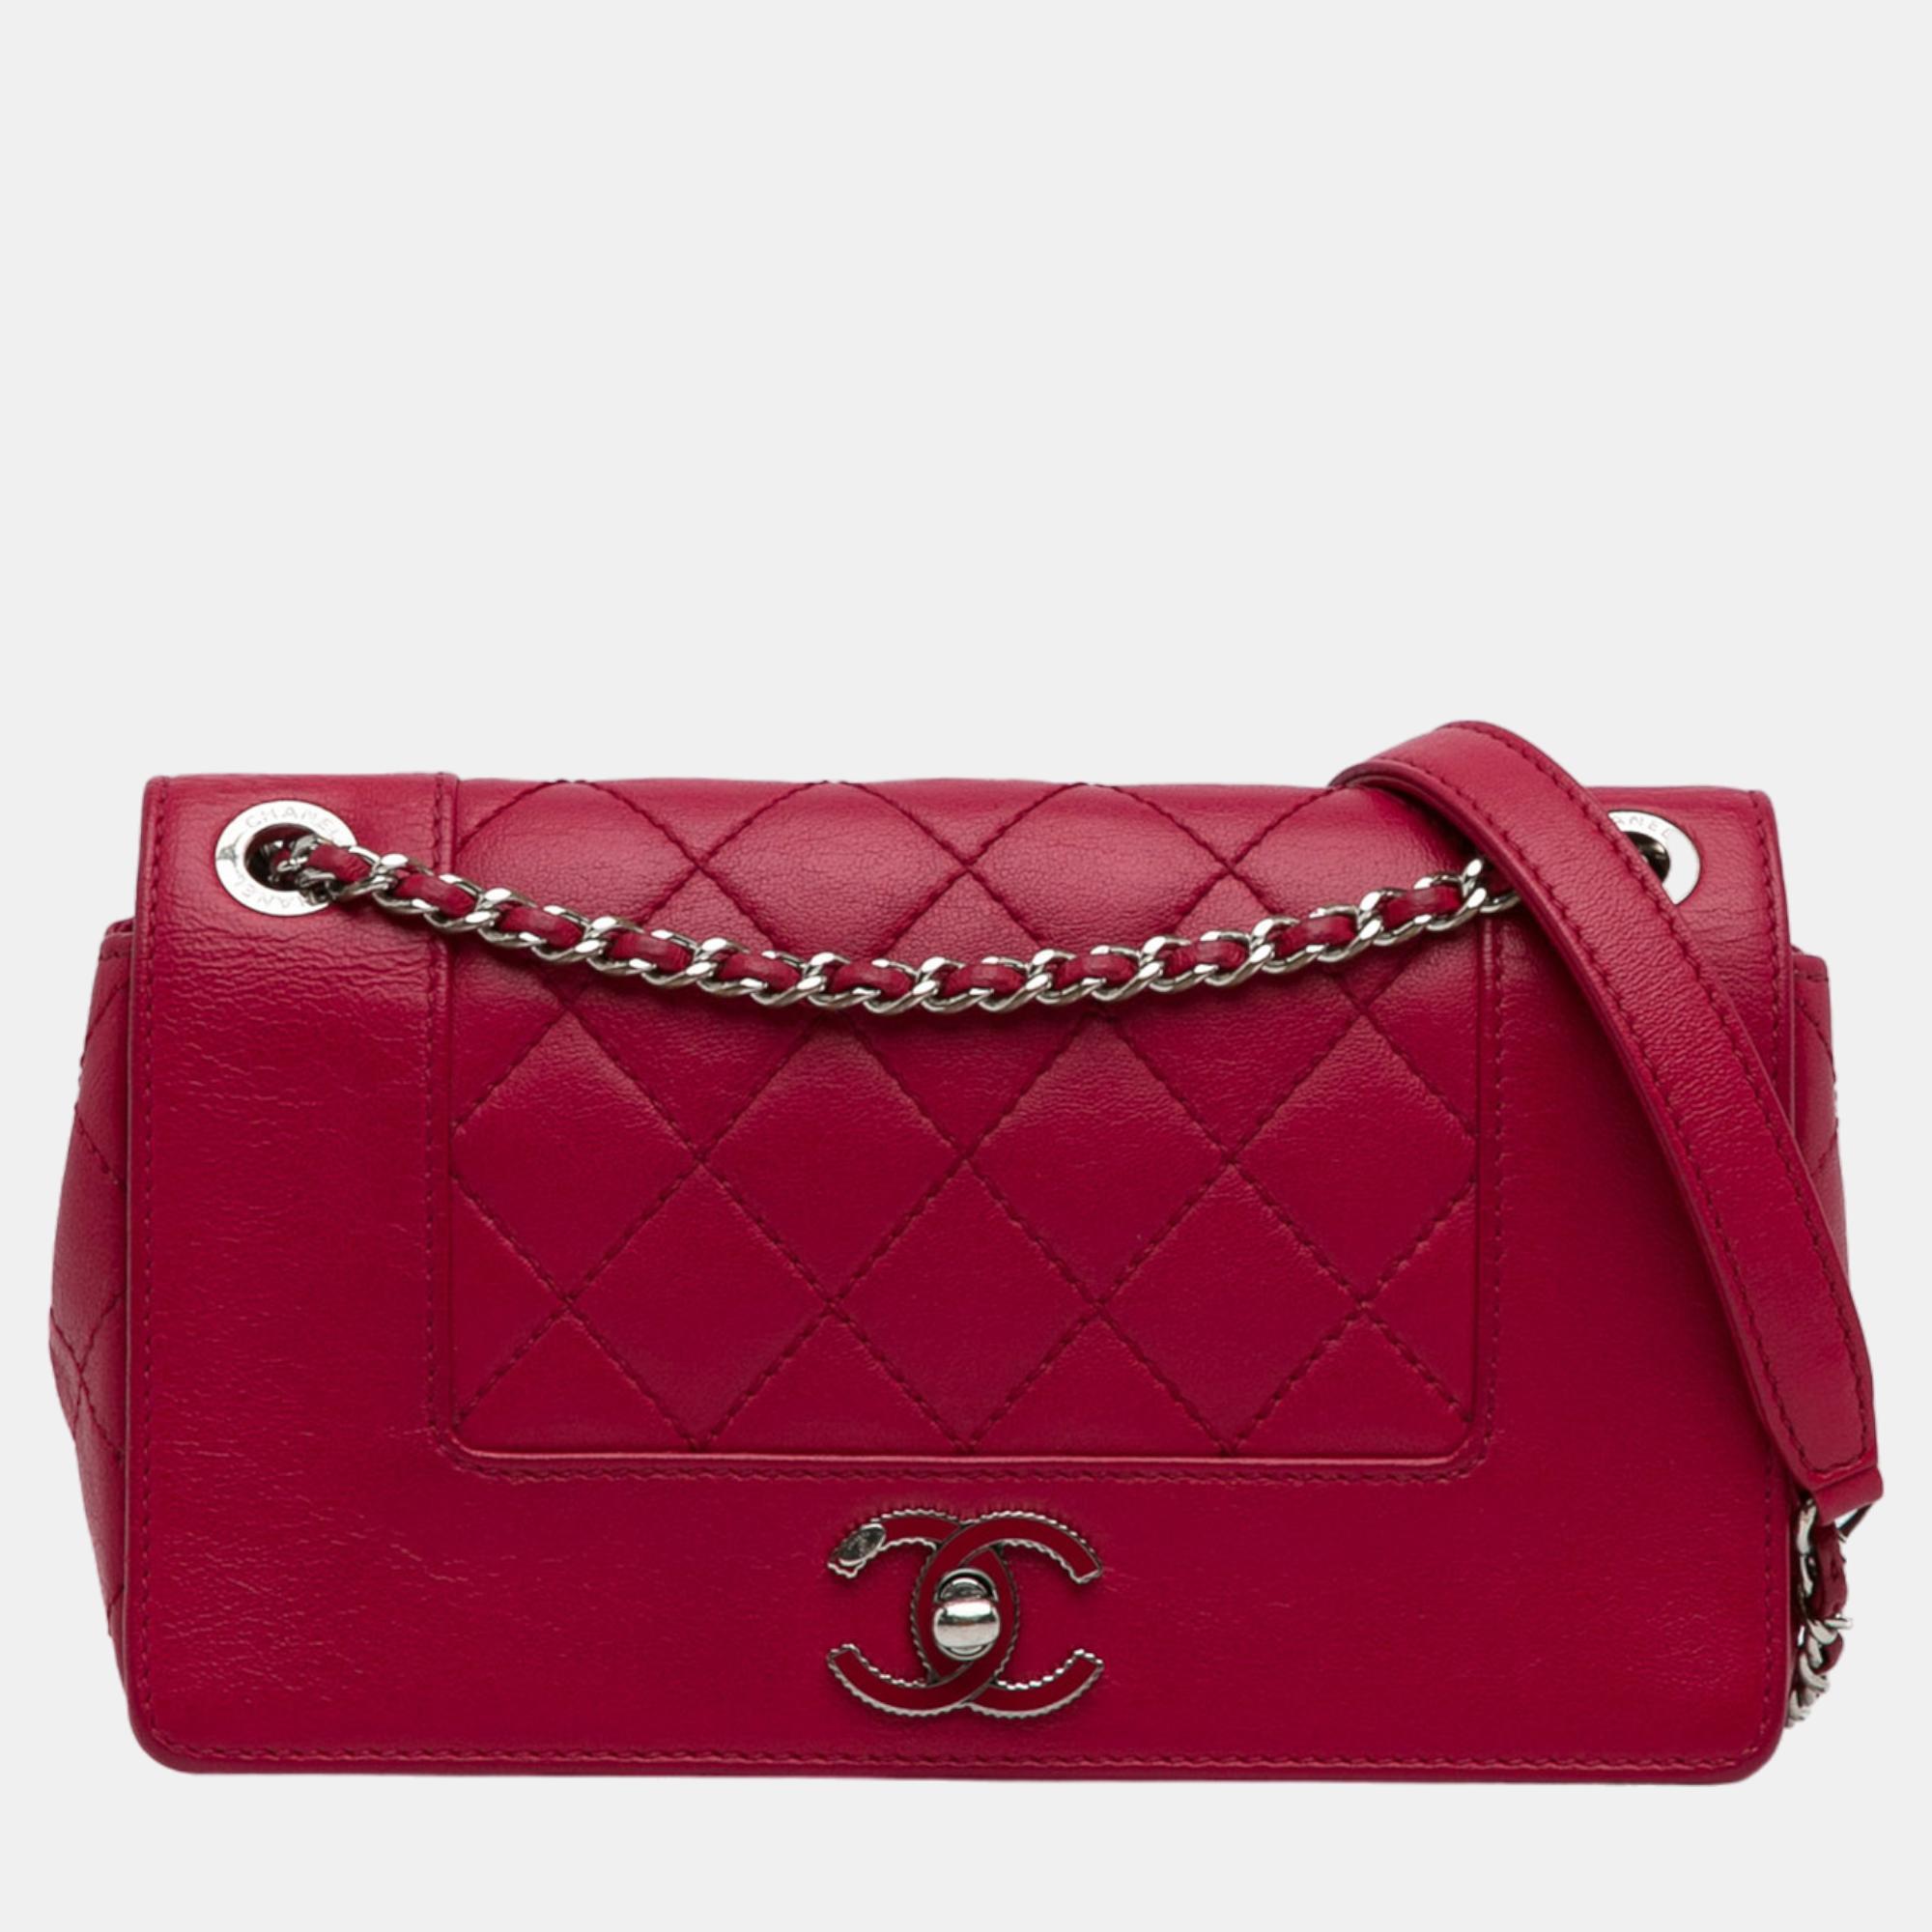 Chanel red small mademoiselle vintage quilted flap